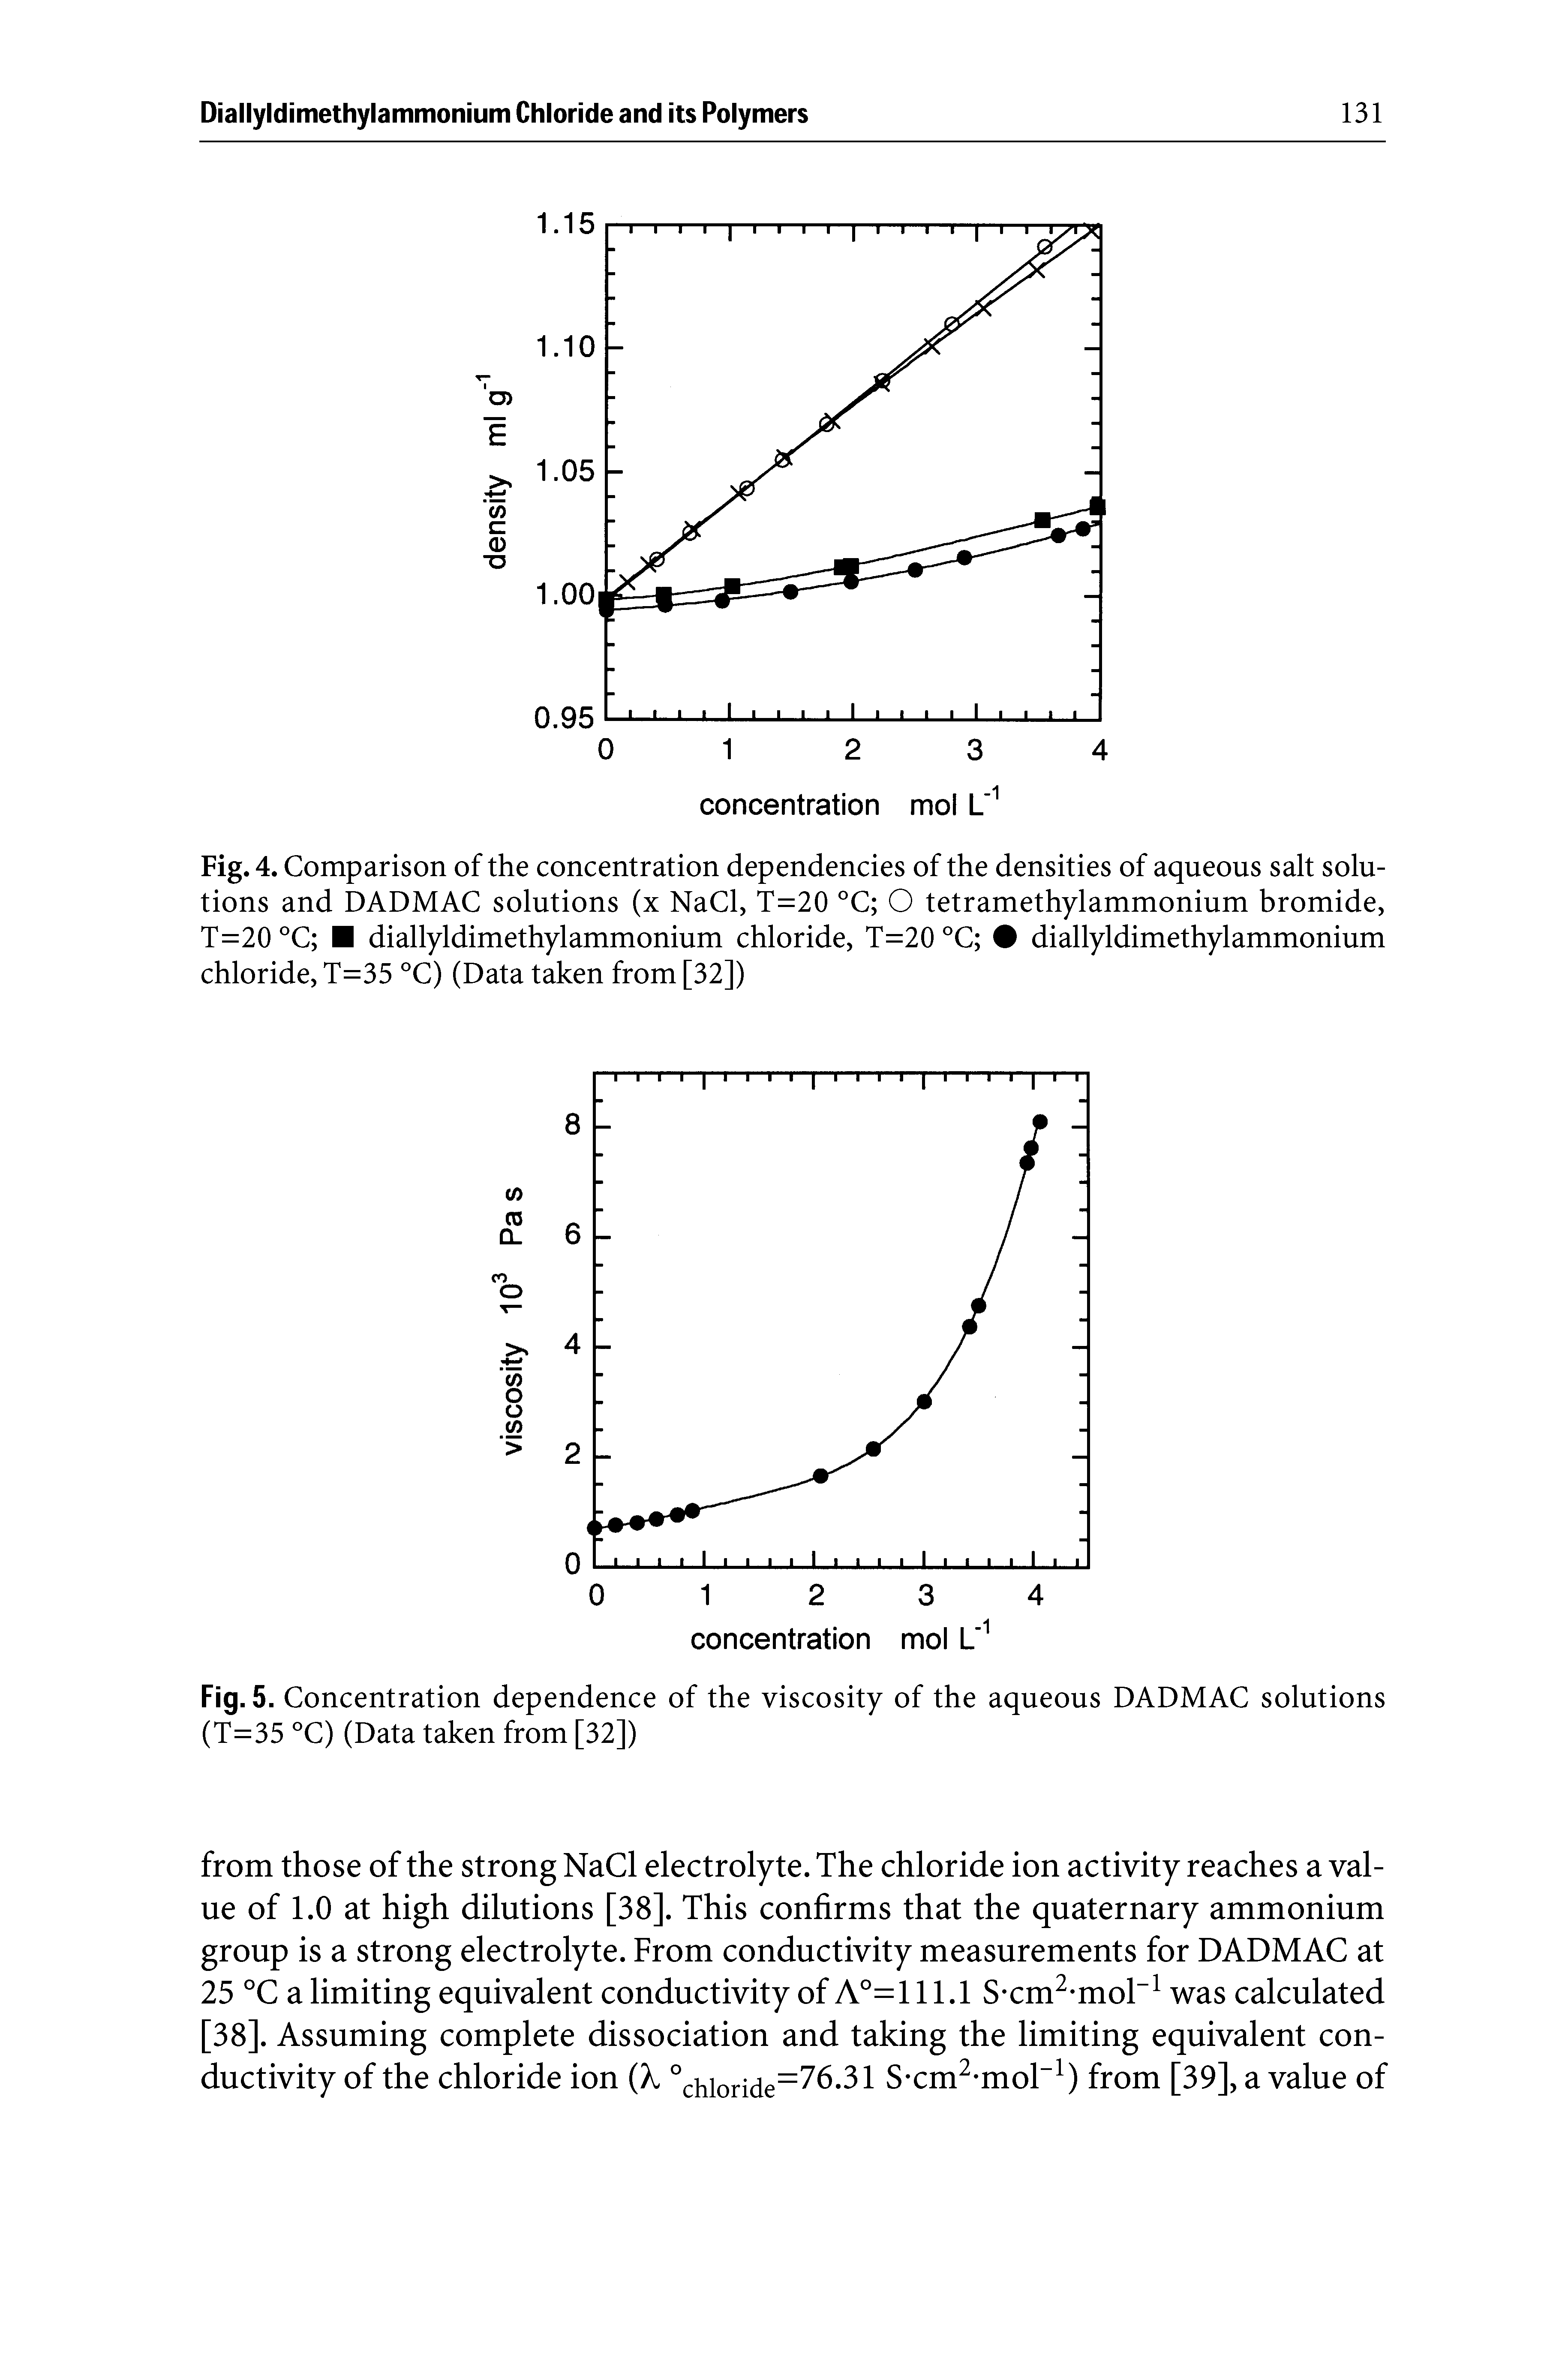 Fig. 4. Comparison of the concentration dependencies of the densities of aqueous salt solutions and DADMAC solutions (x NaCl, T=20 °C O tetramethylammonium bromide, T=20°C diallyldimethylammonium chloride, T=20°C diallyldimethylammonium chloride, T=35 °C) (Data taken from [32])...